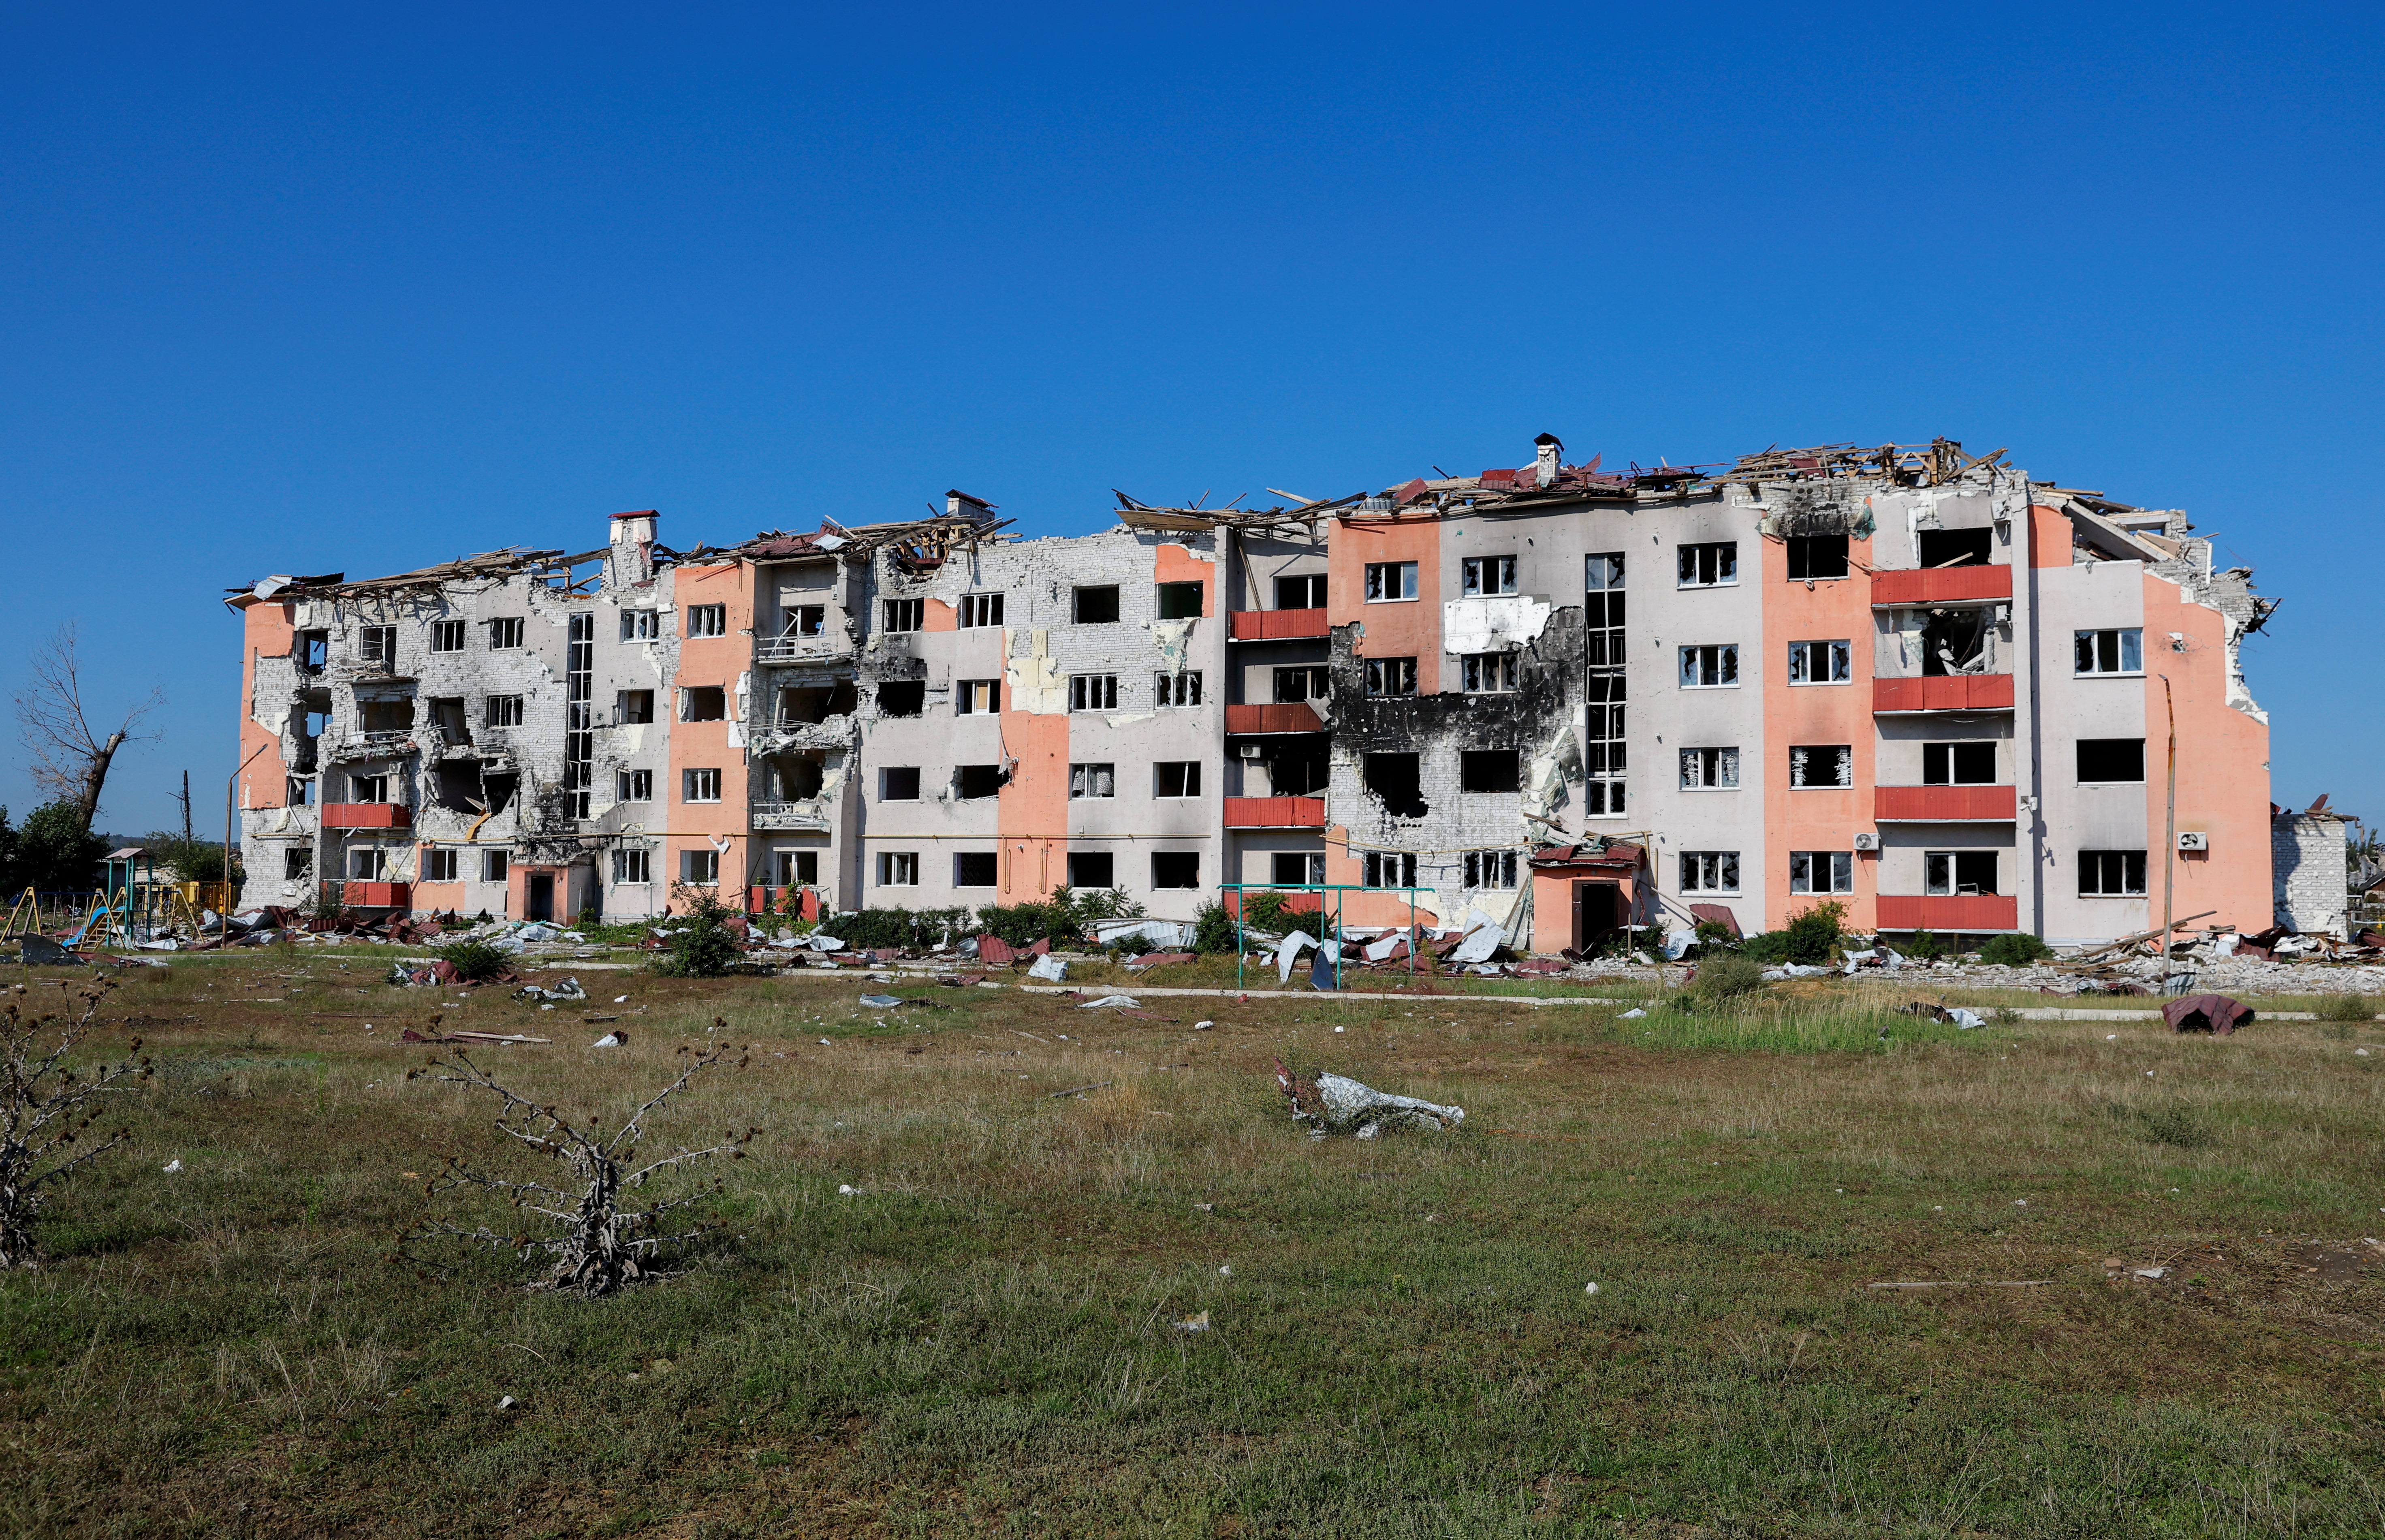 Lysychansk city in the course of Russia-Ukraine conflict in Luhansk Region